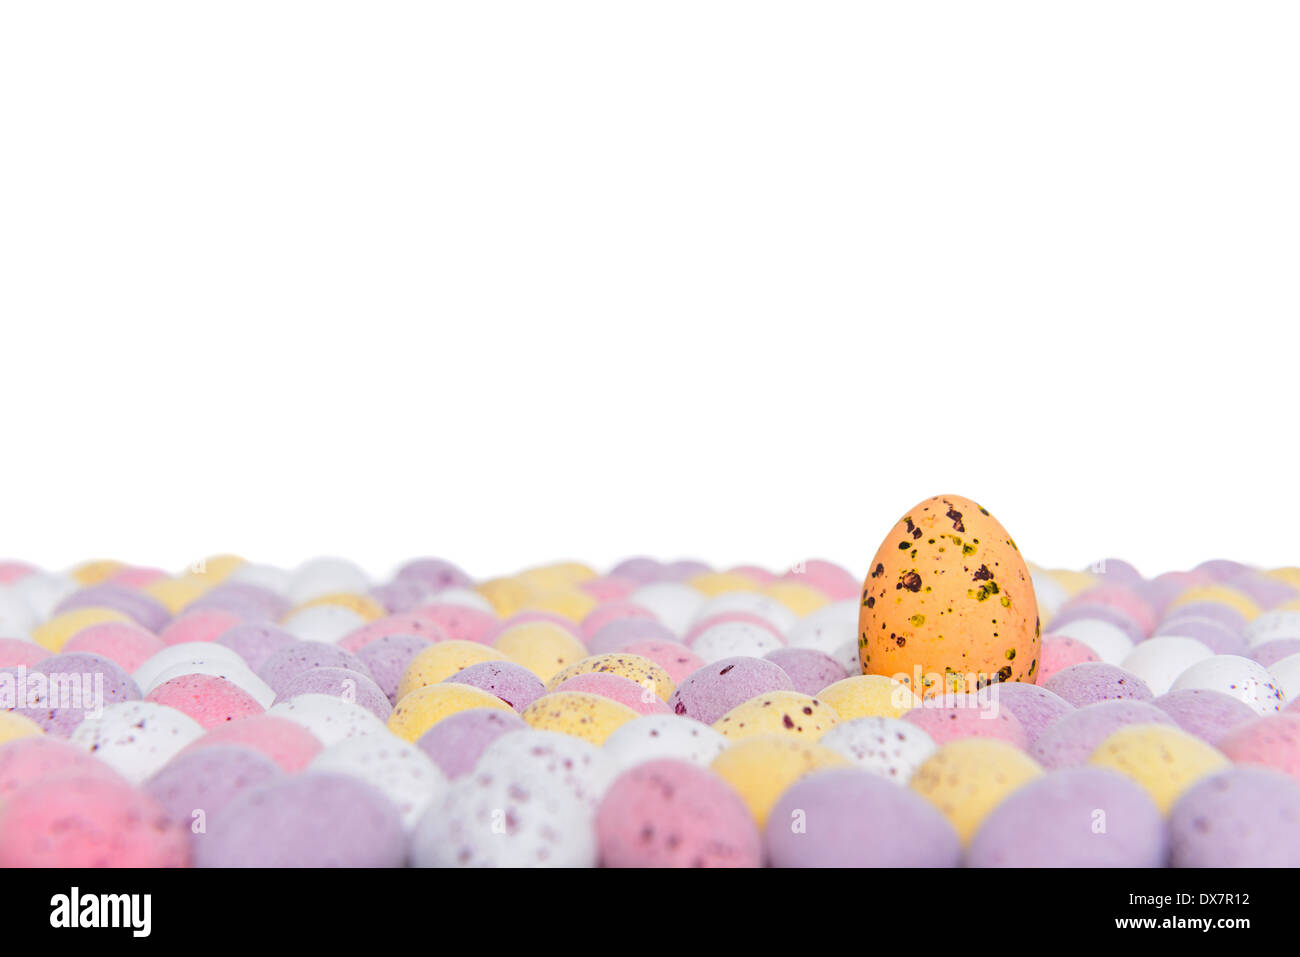 Candy covered chocolate easter eggs with one rising above the others, space above for your own message. Stock Photo